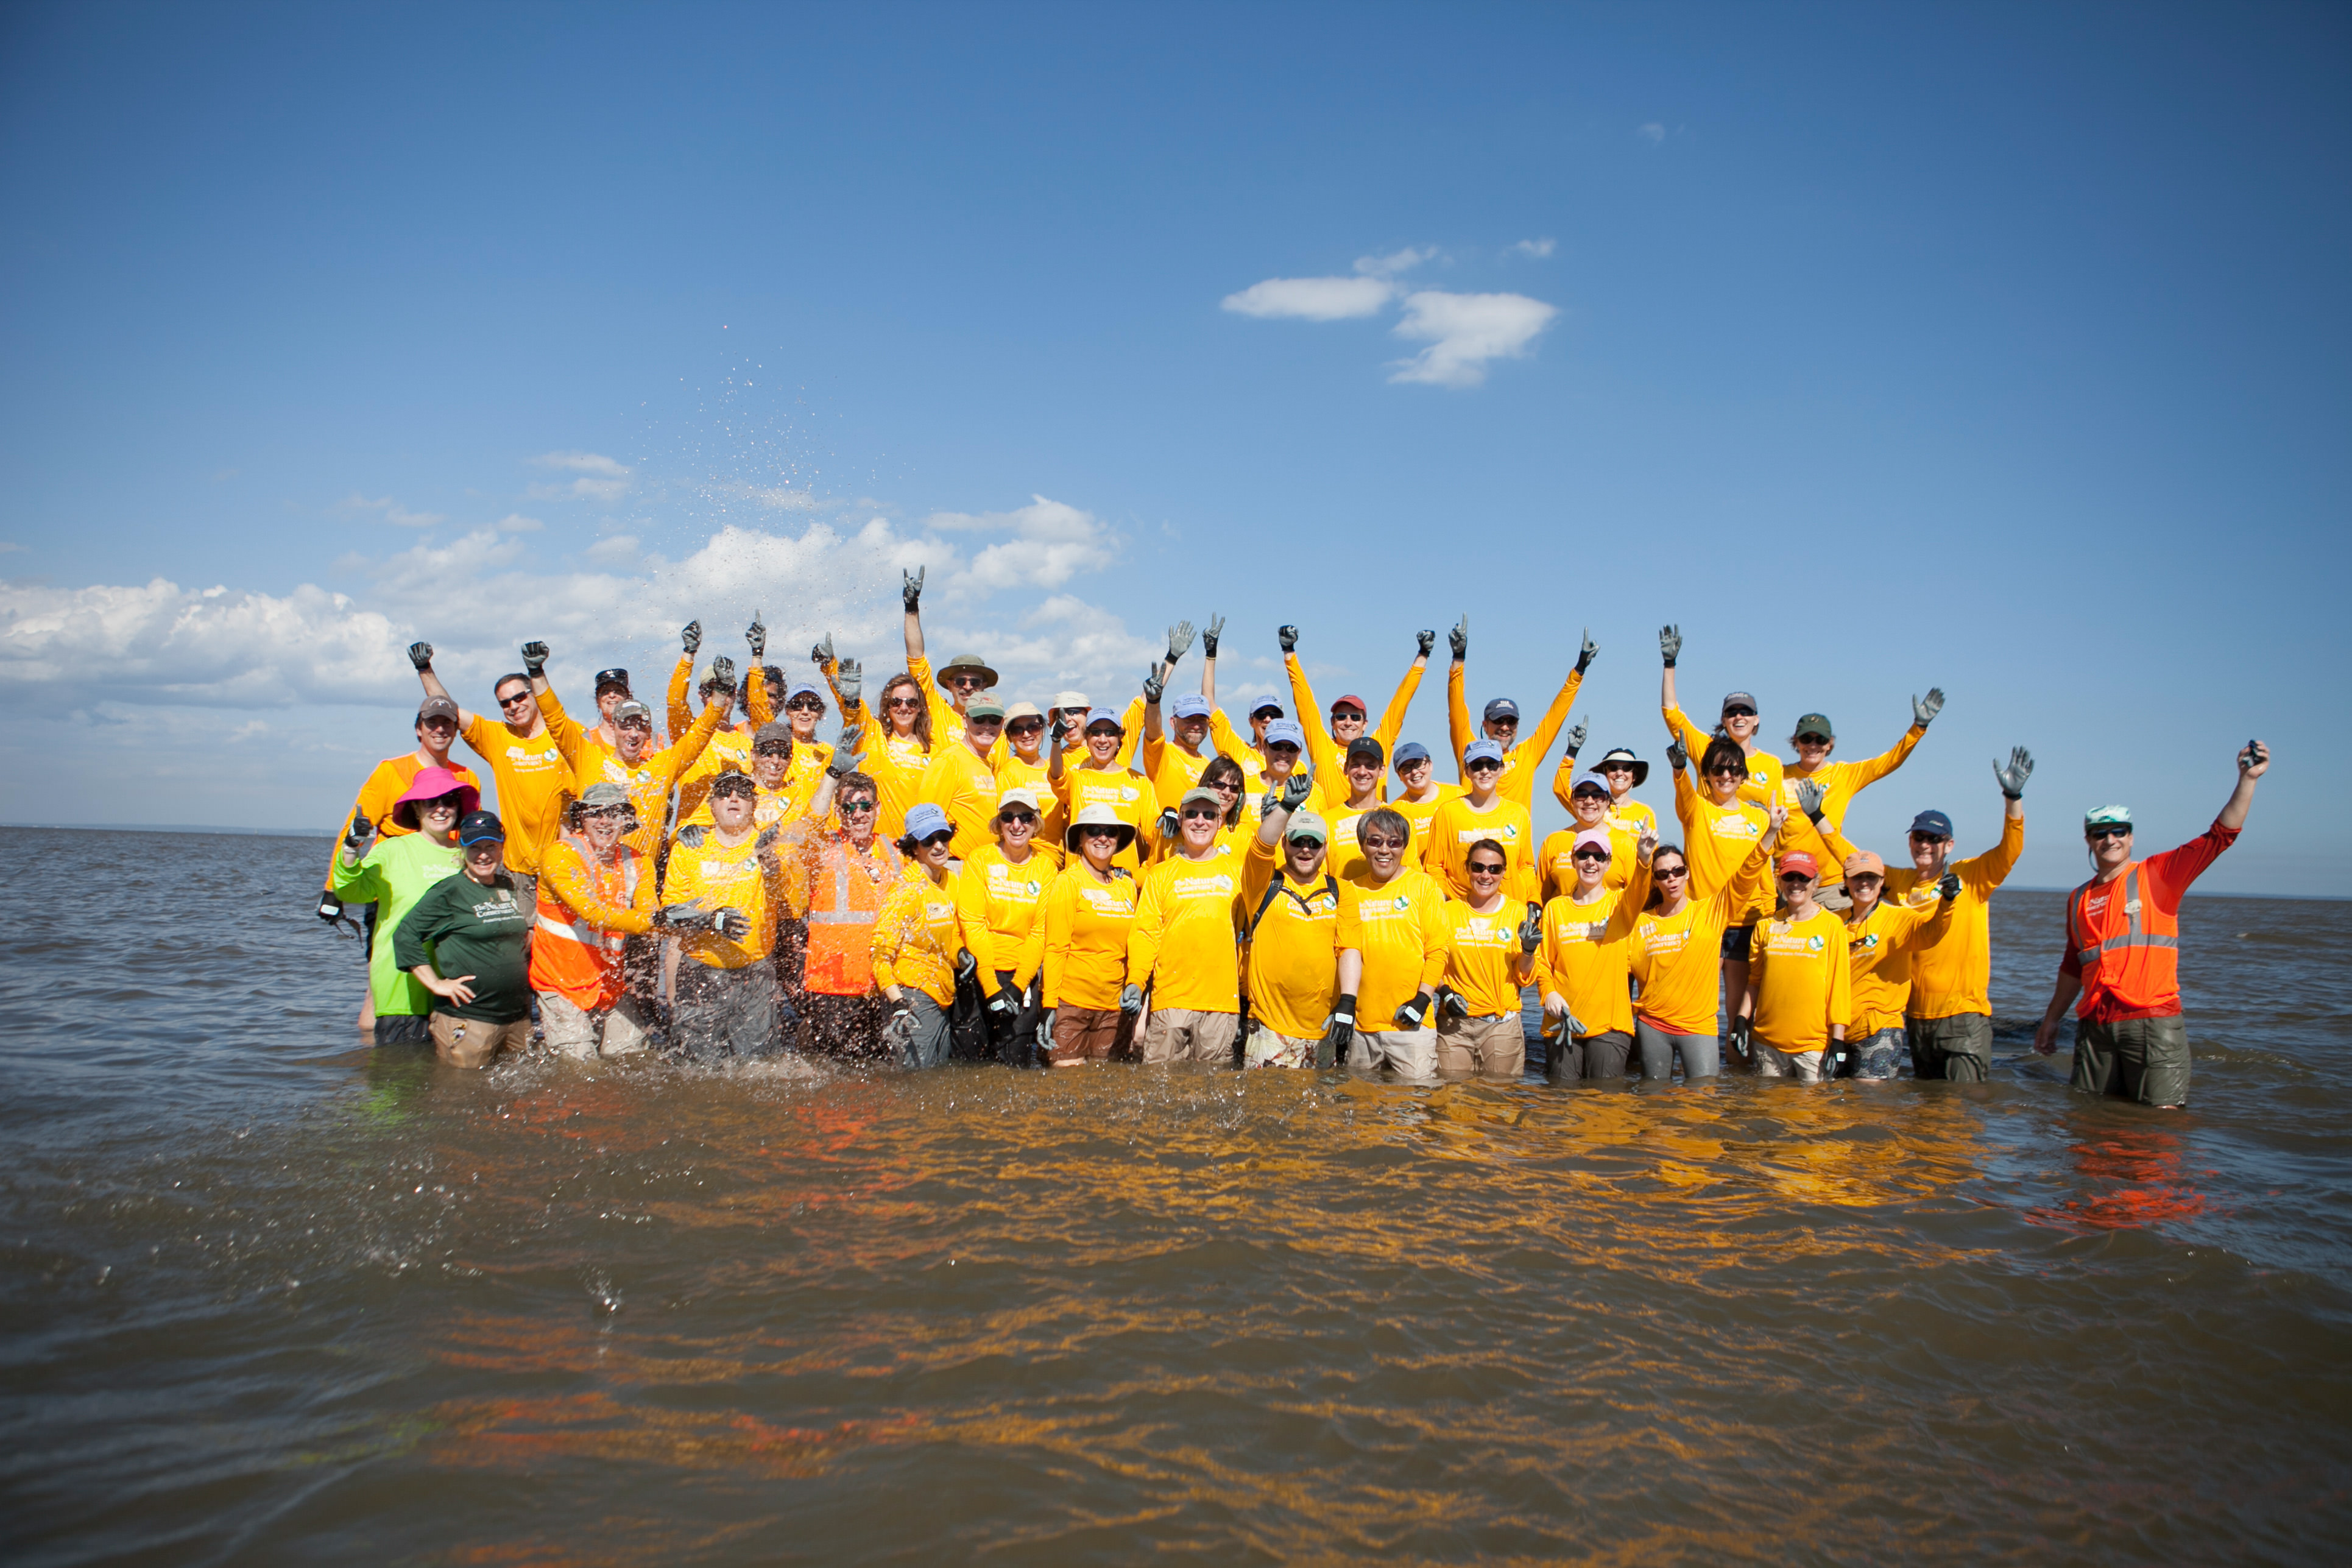 TNC Senior Leaders work together to build five reef structures at Arlington Cove in Mobile Bay, Alabama